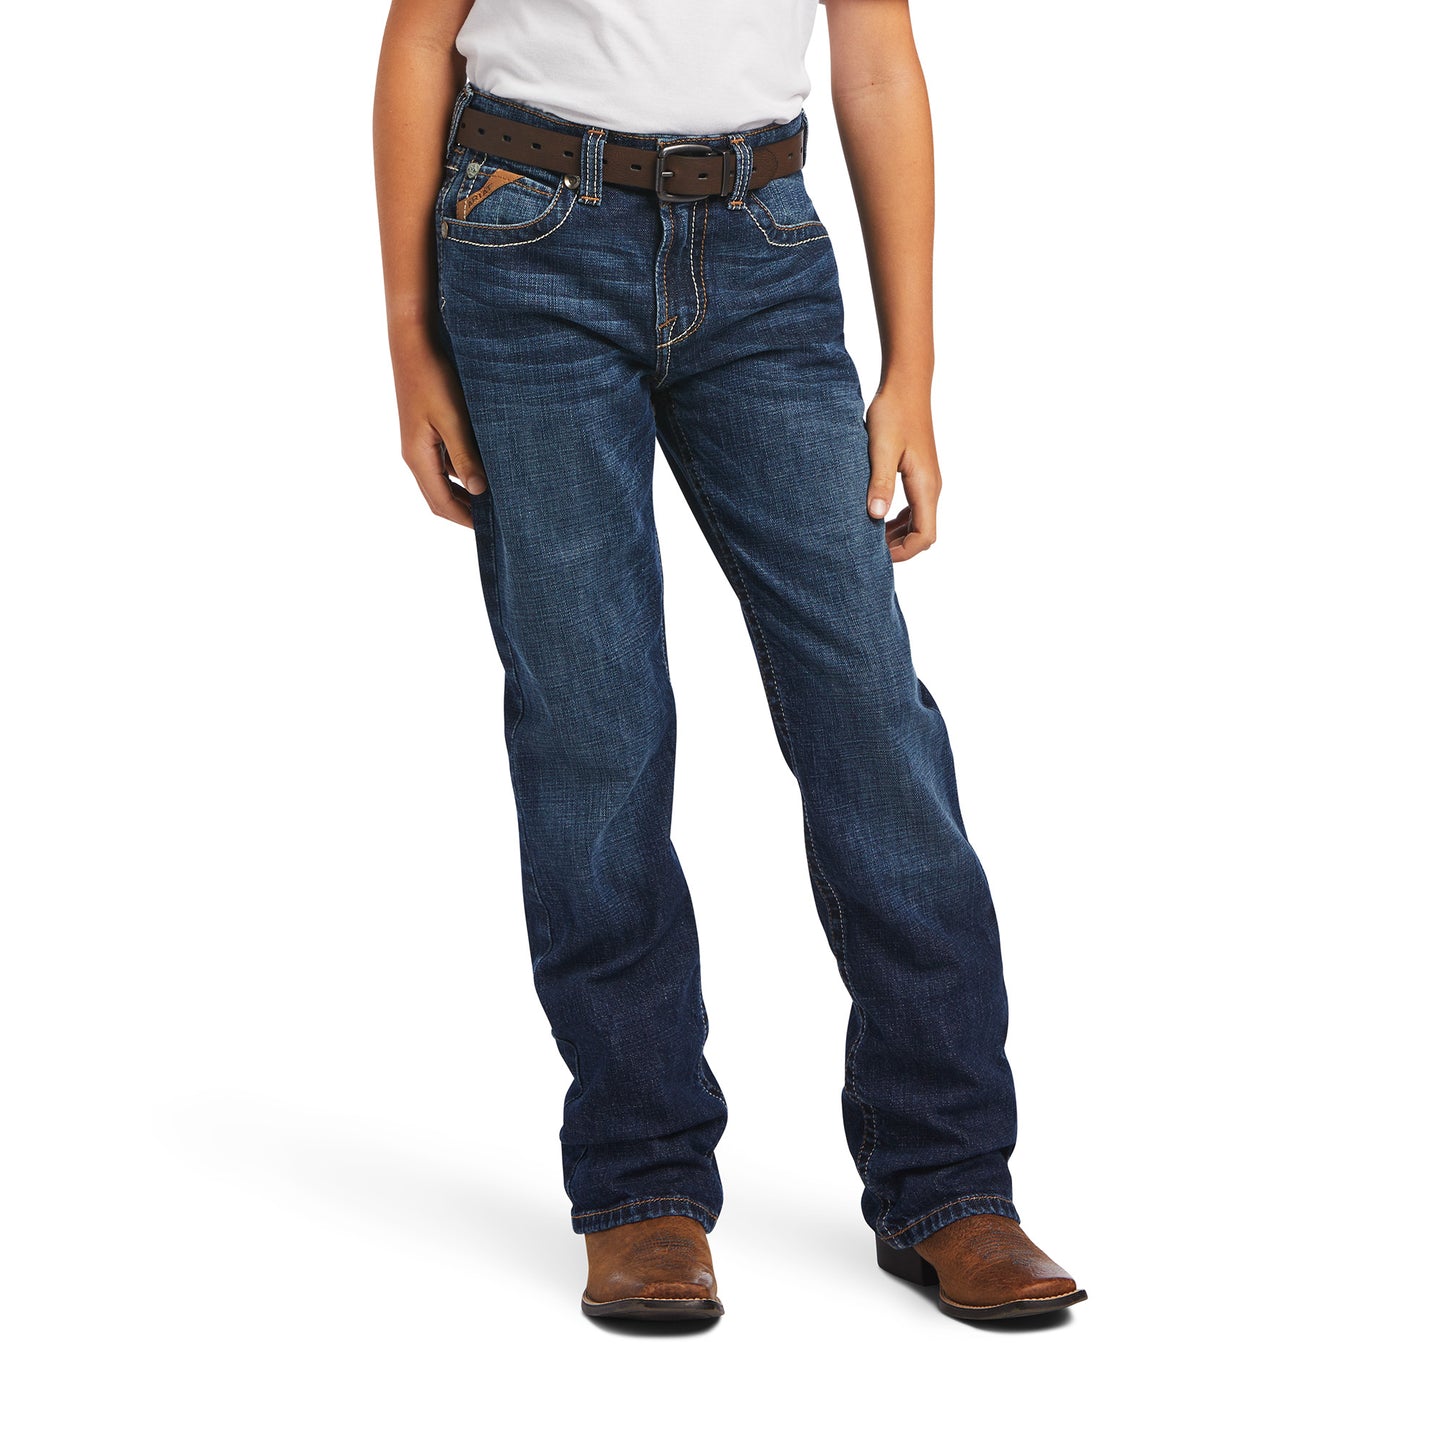 Ariat® Youth Boy's B4 Ramos Relaxed Tourismo Bootcut Jeans 10041090